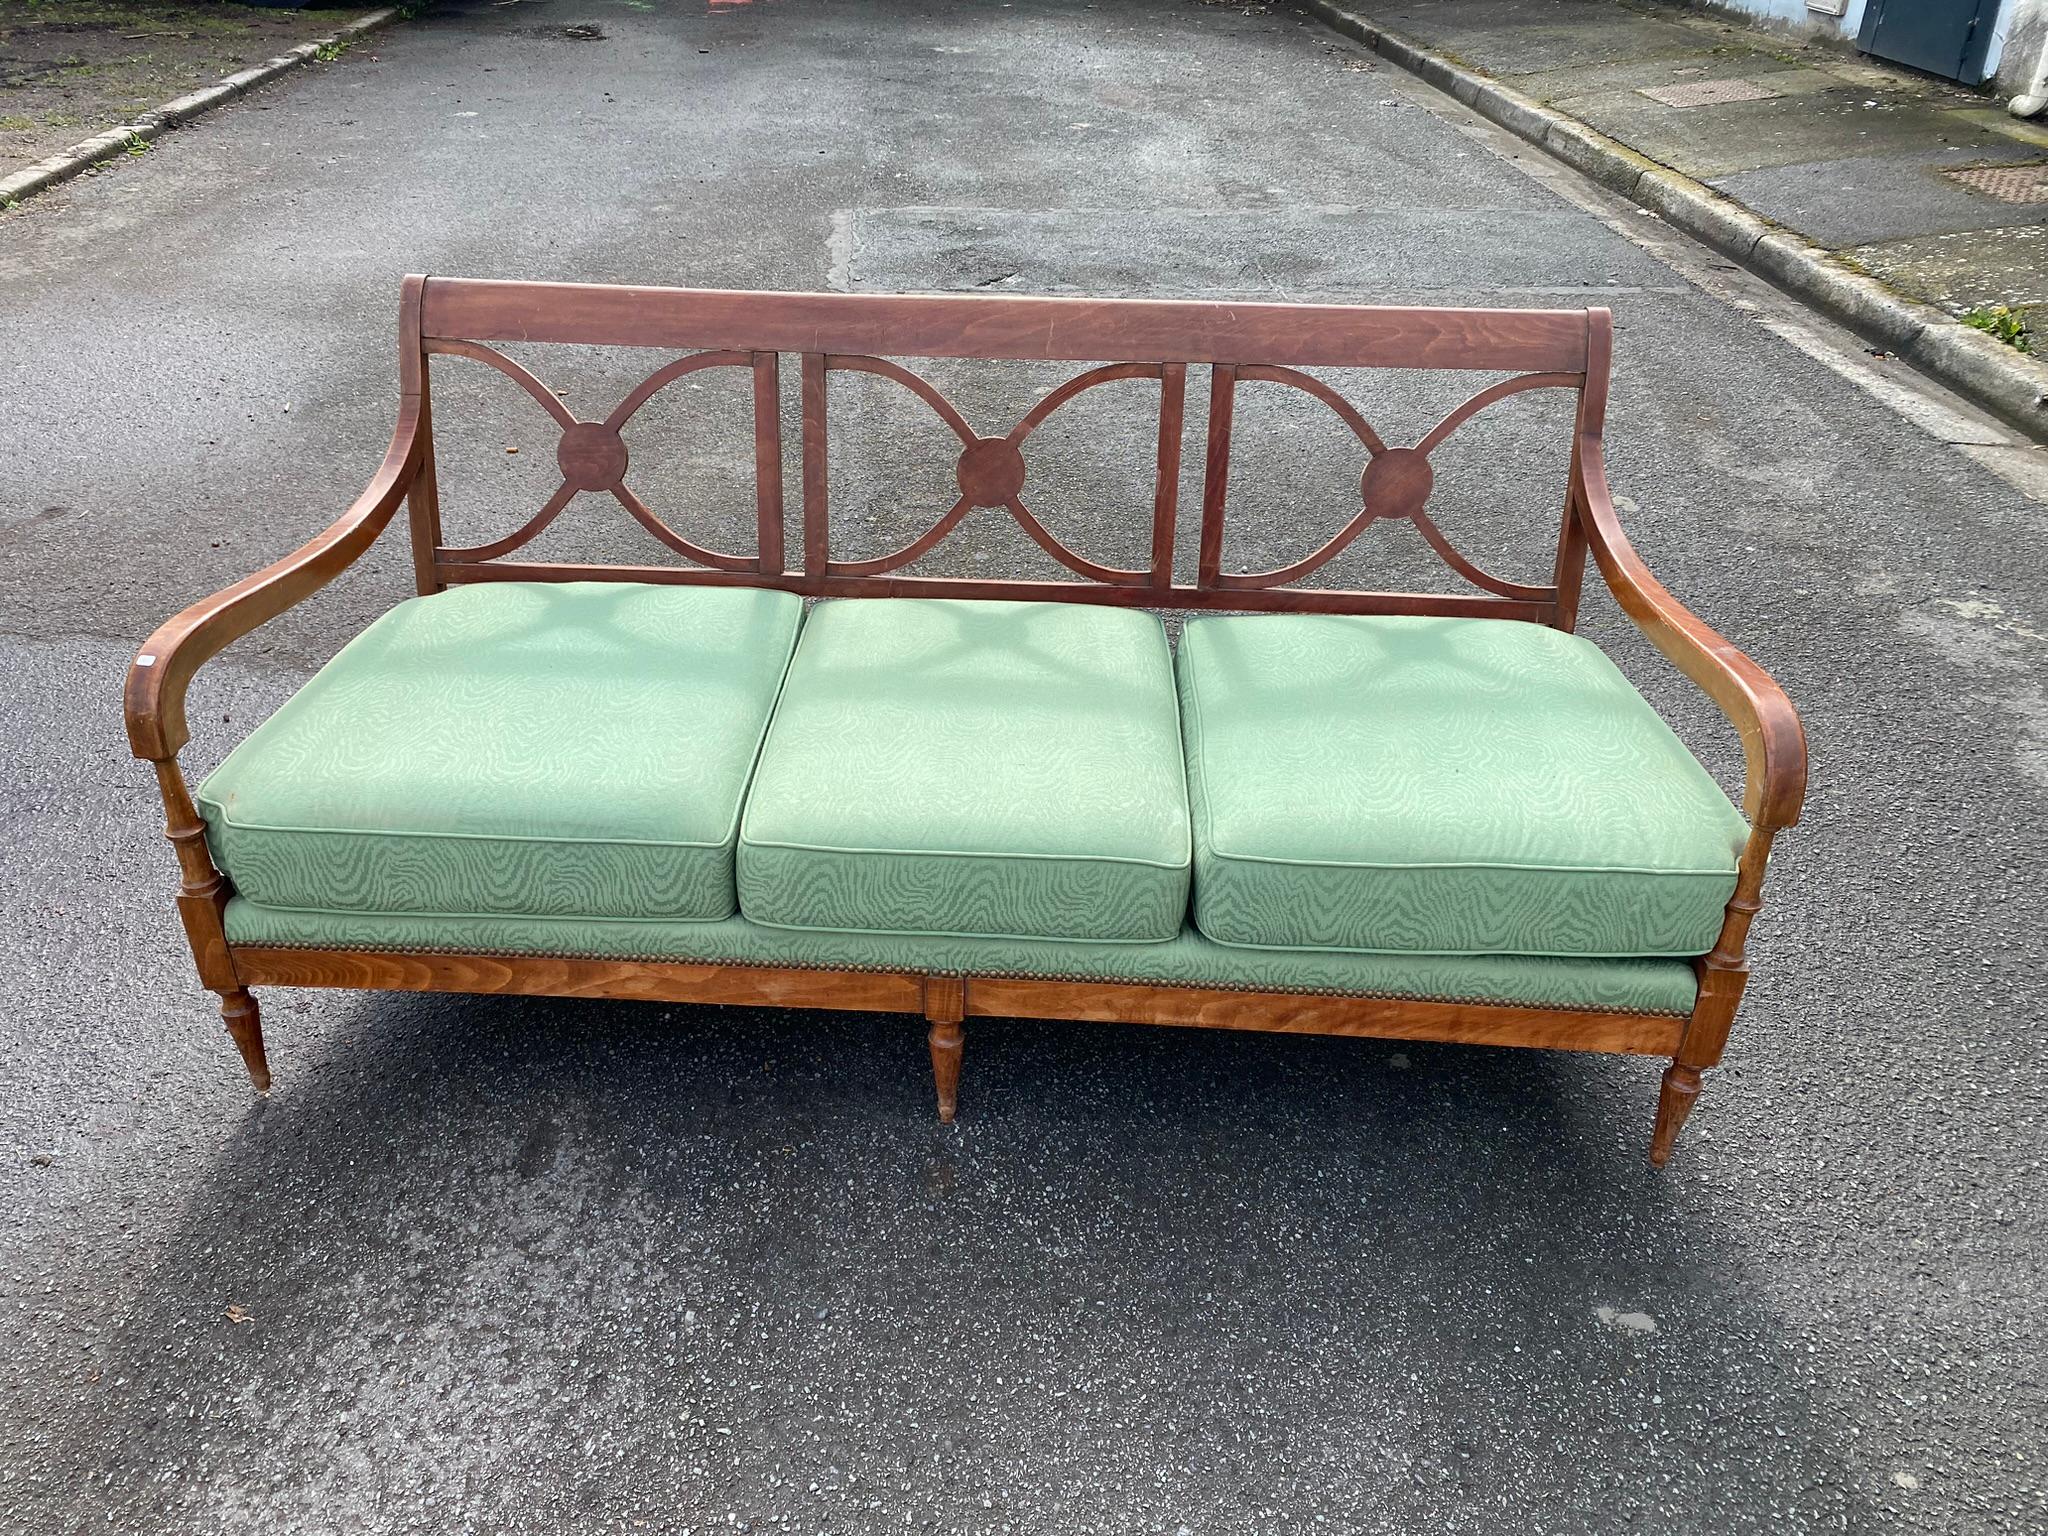 Maison Jansen, Living Room Set Including a Sofa and 2 Armchairs, circa 1940 For Sale 1